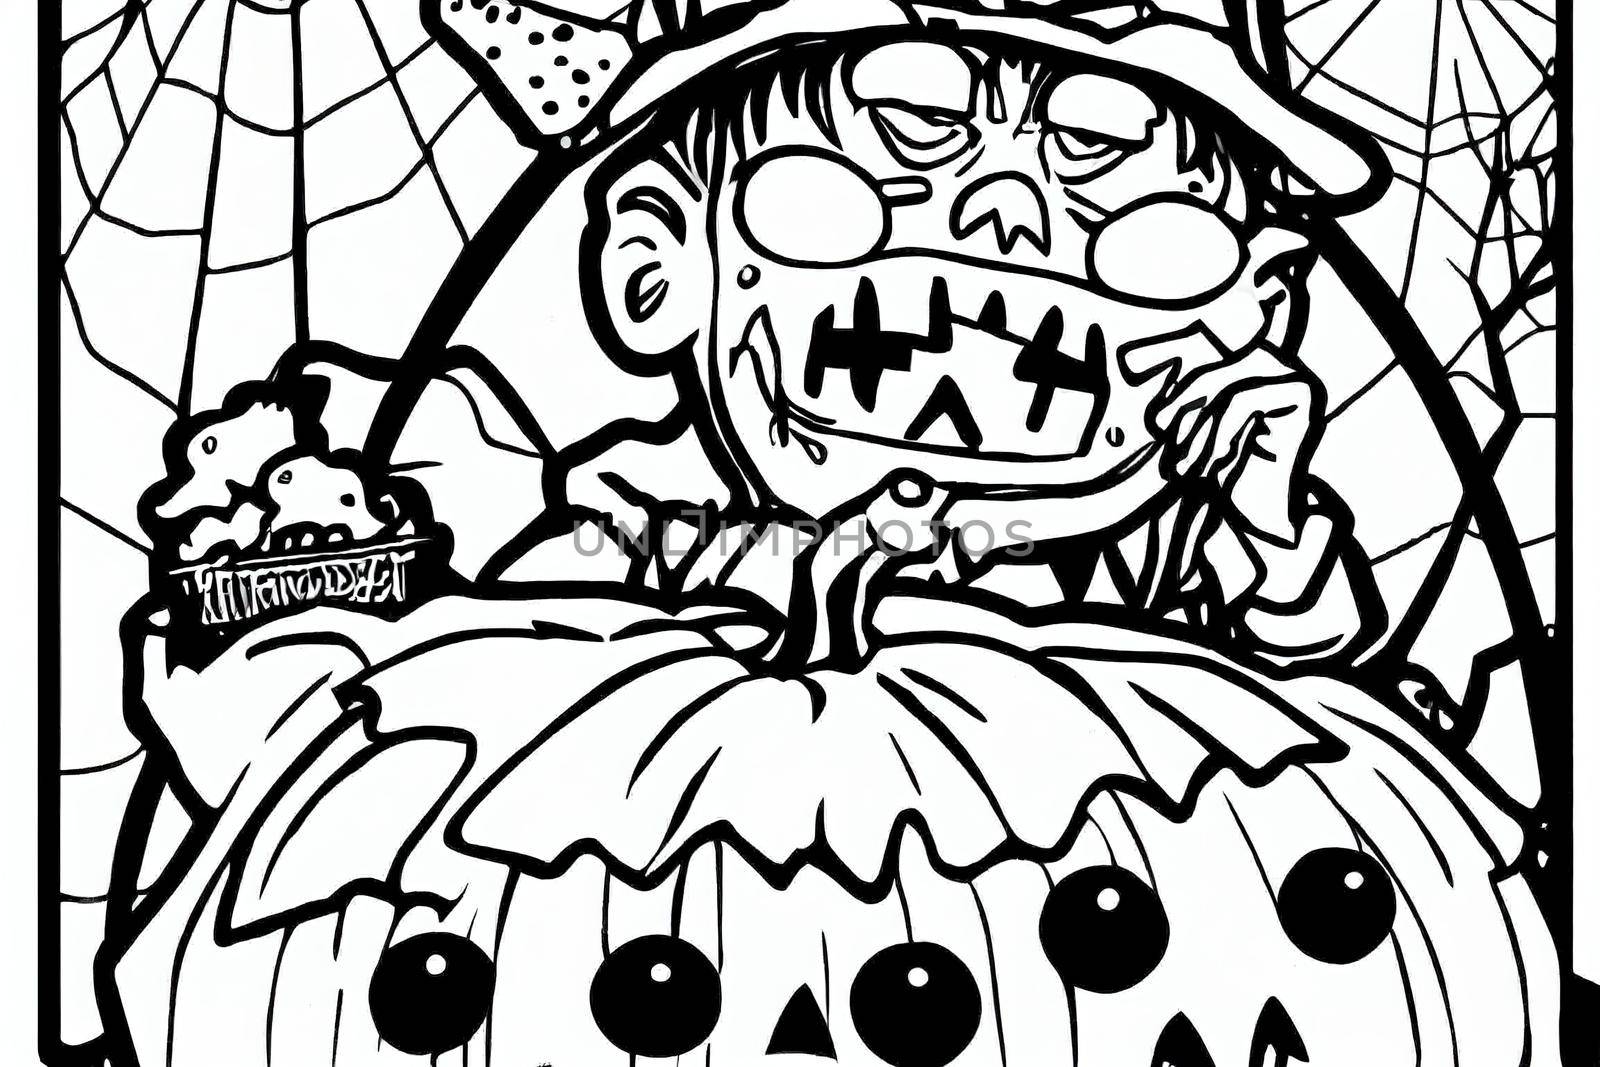 Trick or Treat coloring page. Halloween coloring page for by 2ragon